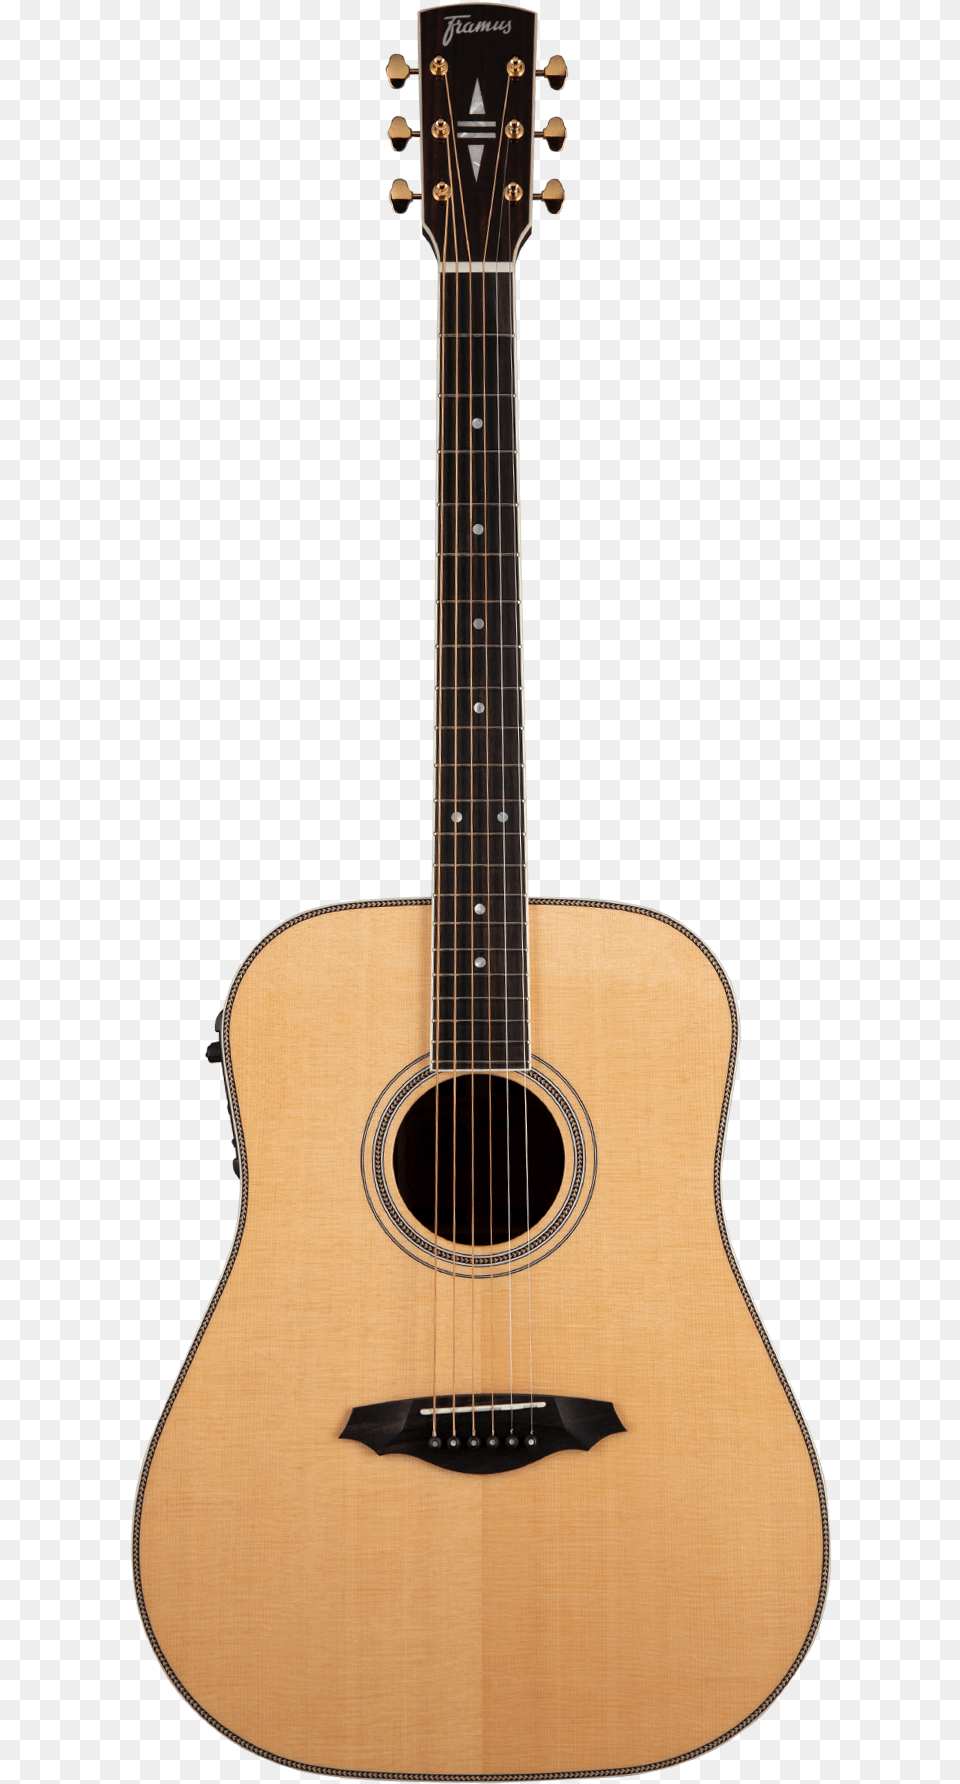 Fr Fd 28 N Sr Vnt E Swatch Stock Picture Of Guitar, Musical Instrument, Bass Guitar Free Png